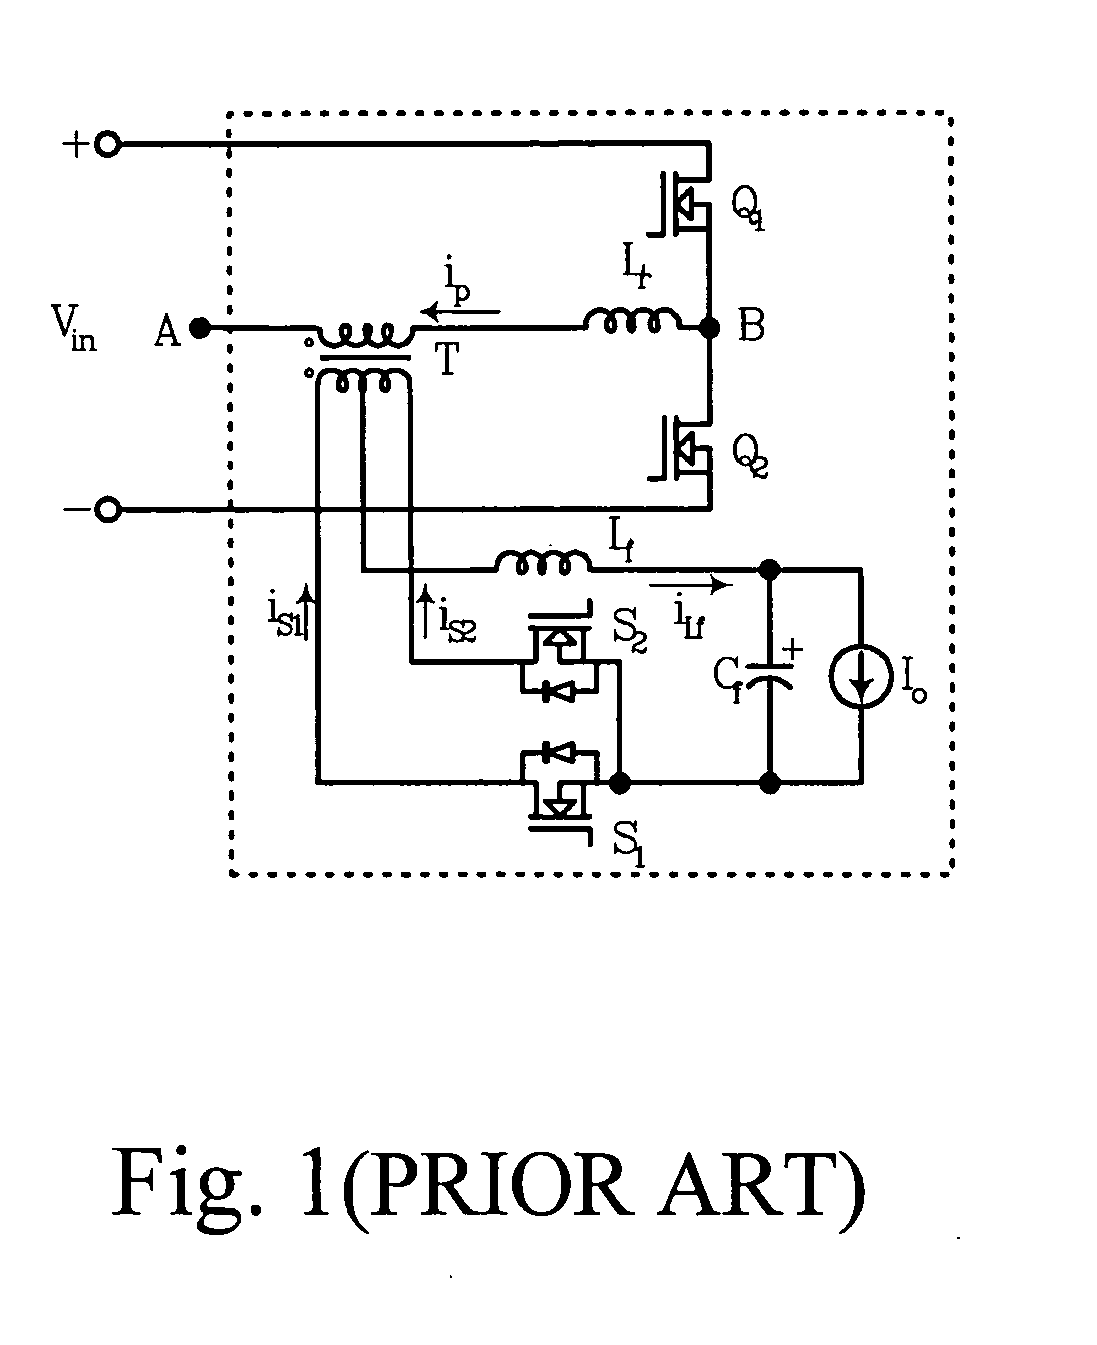 Converter with synchronous rectifier with ZVS